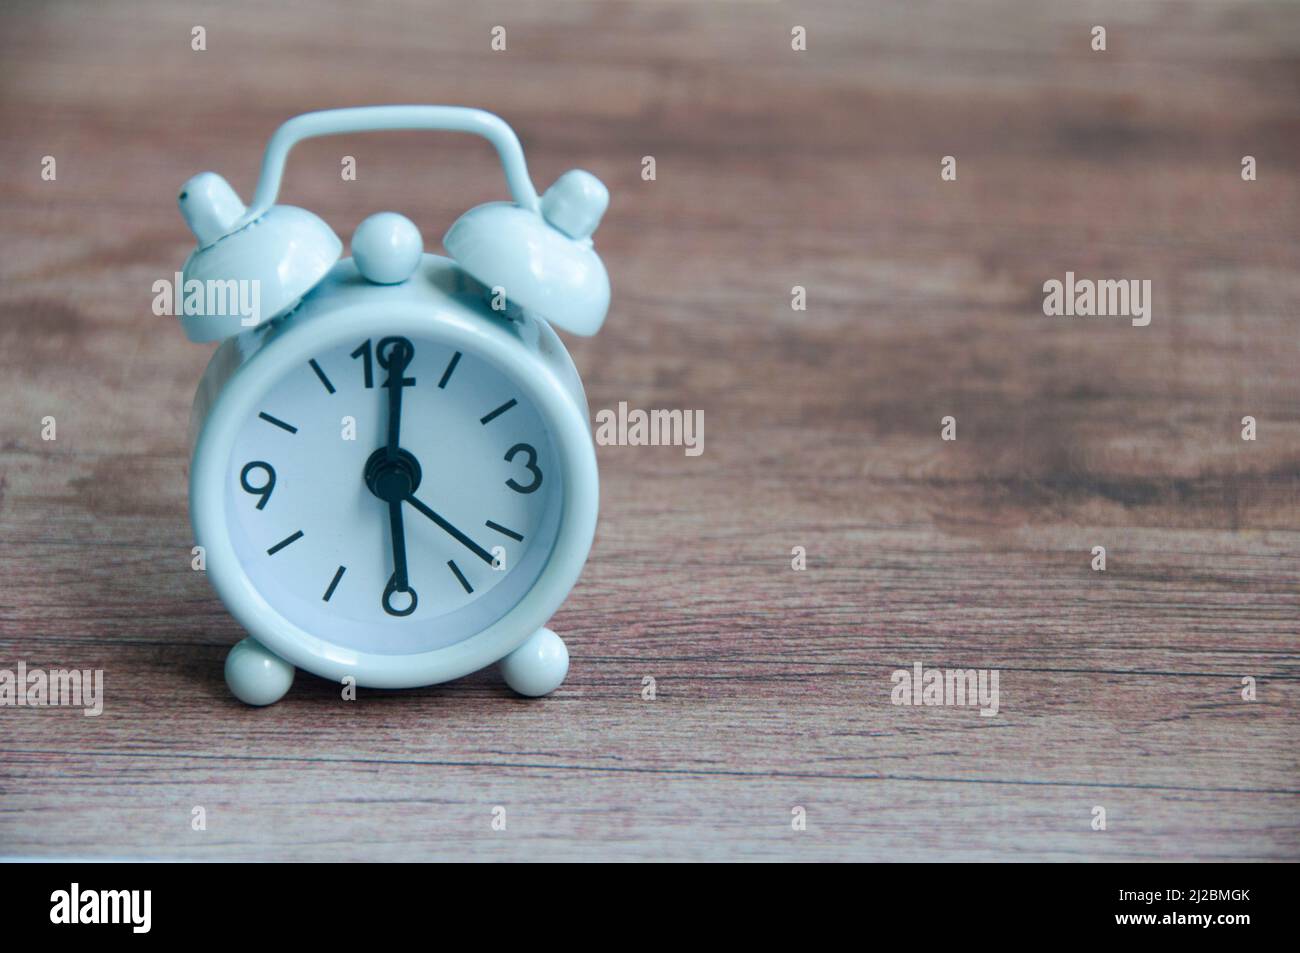 White alarm clock isolated on wooden desk. The clock set at 6 o'clock. Stock Photo